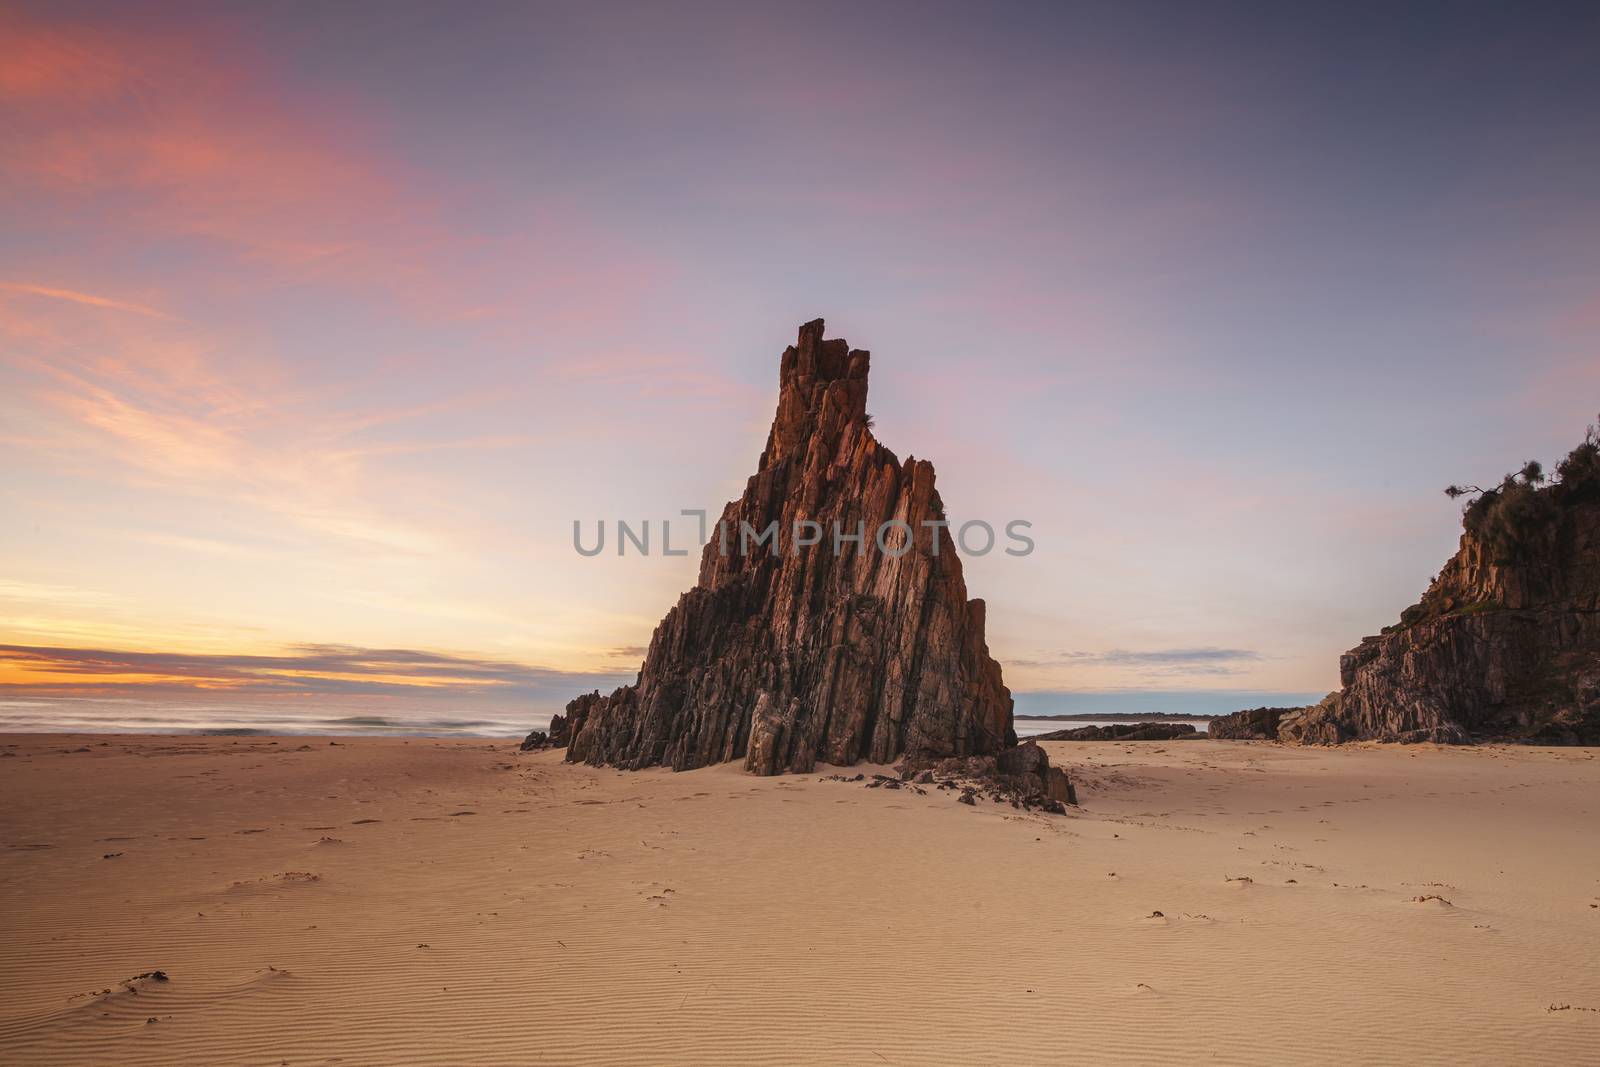 Sunrise morning with pretty red clouds at the remote beach with the local pyramid sea stack rising up out of the sands